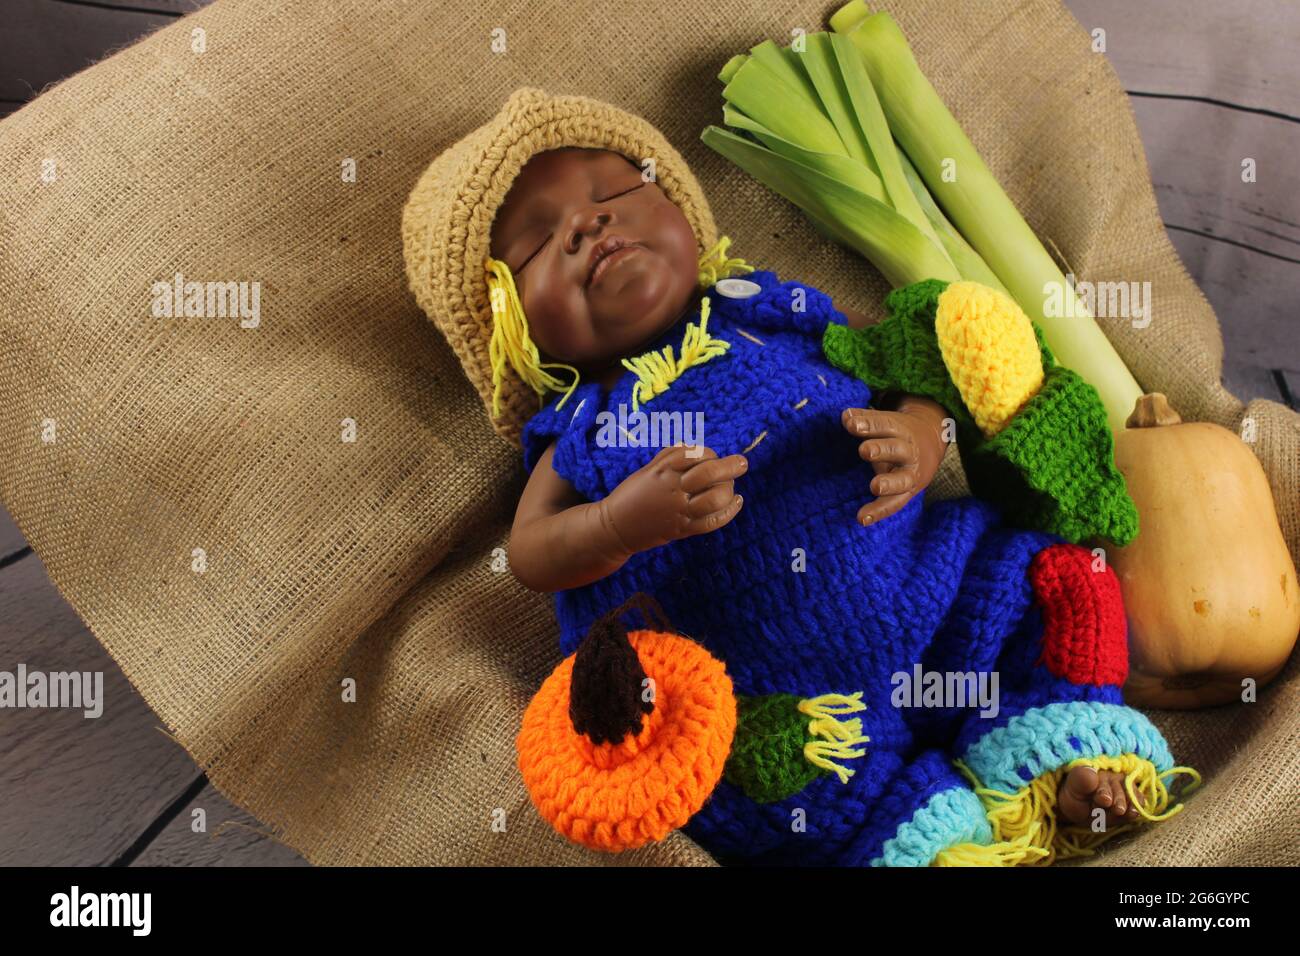 African American baby in blue dungarees surrounded by autumn vegetables. Harvest festival concept represented by a reborn doll Stock Photo